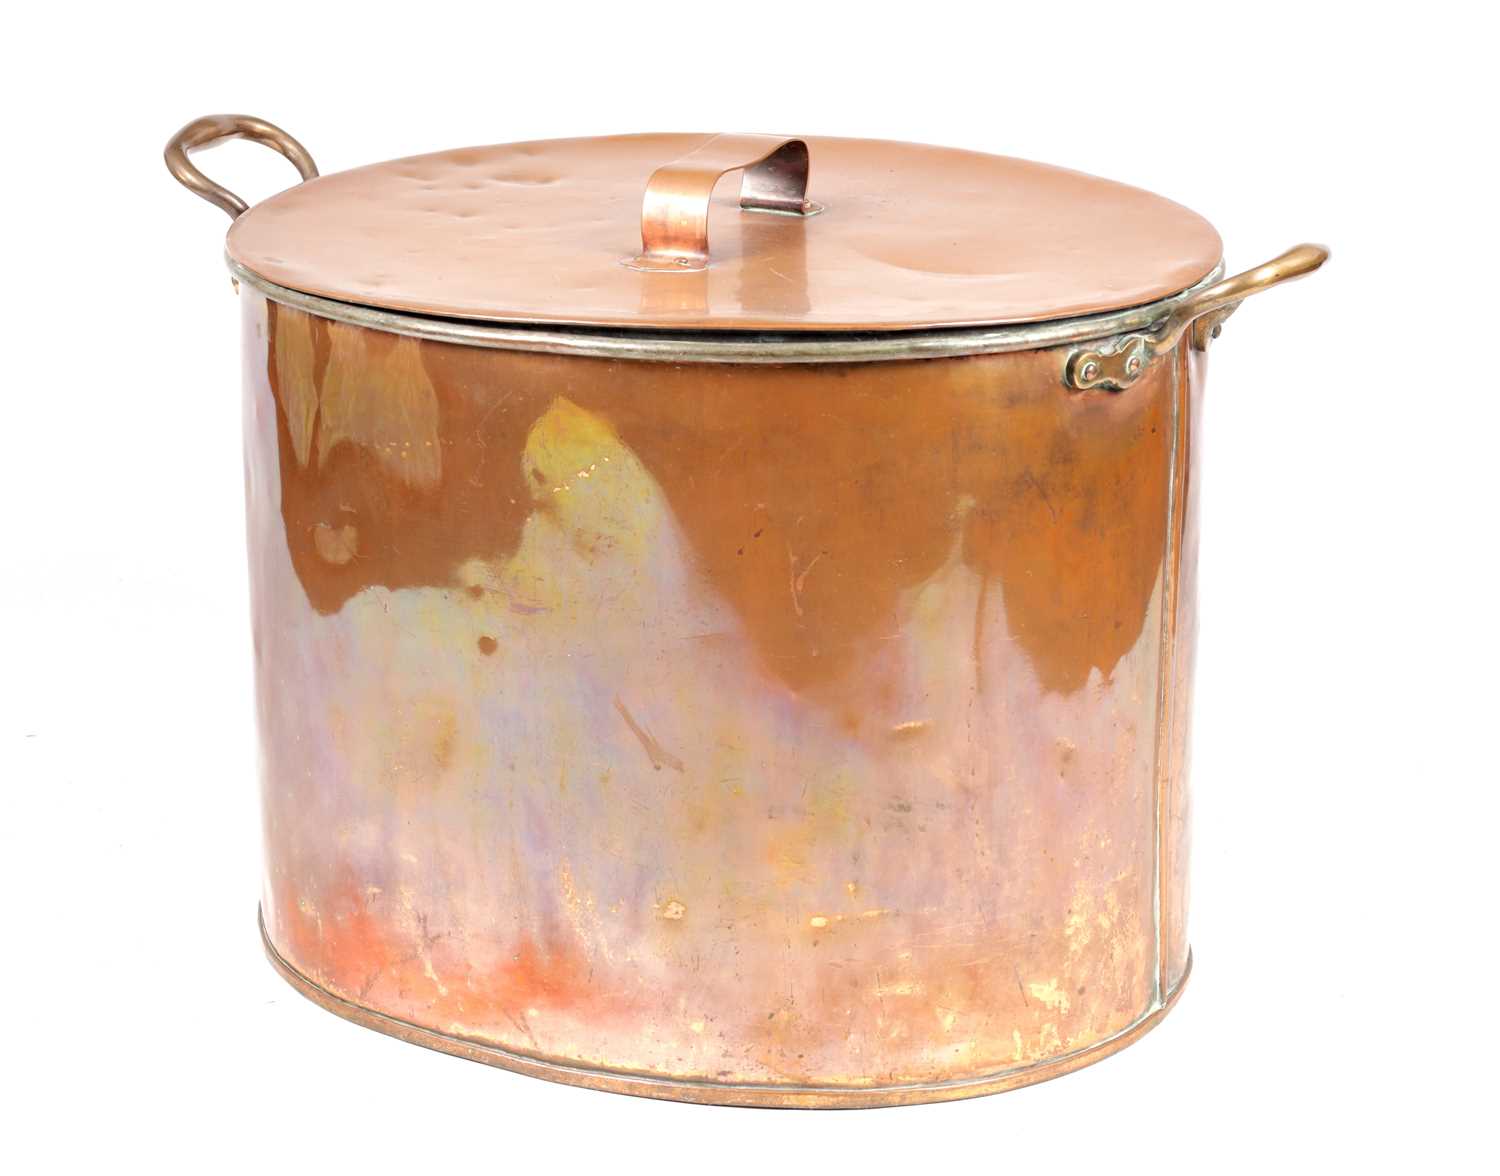 Lot 523 - A LARGE LATE 19TH CENTURY COPPER LIDDED COOKING POT